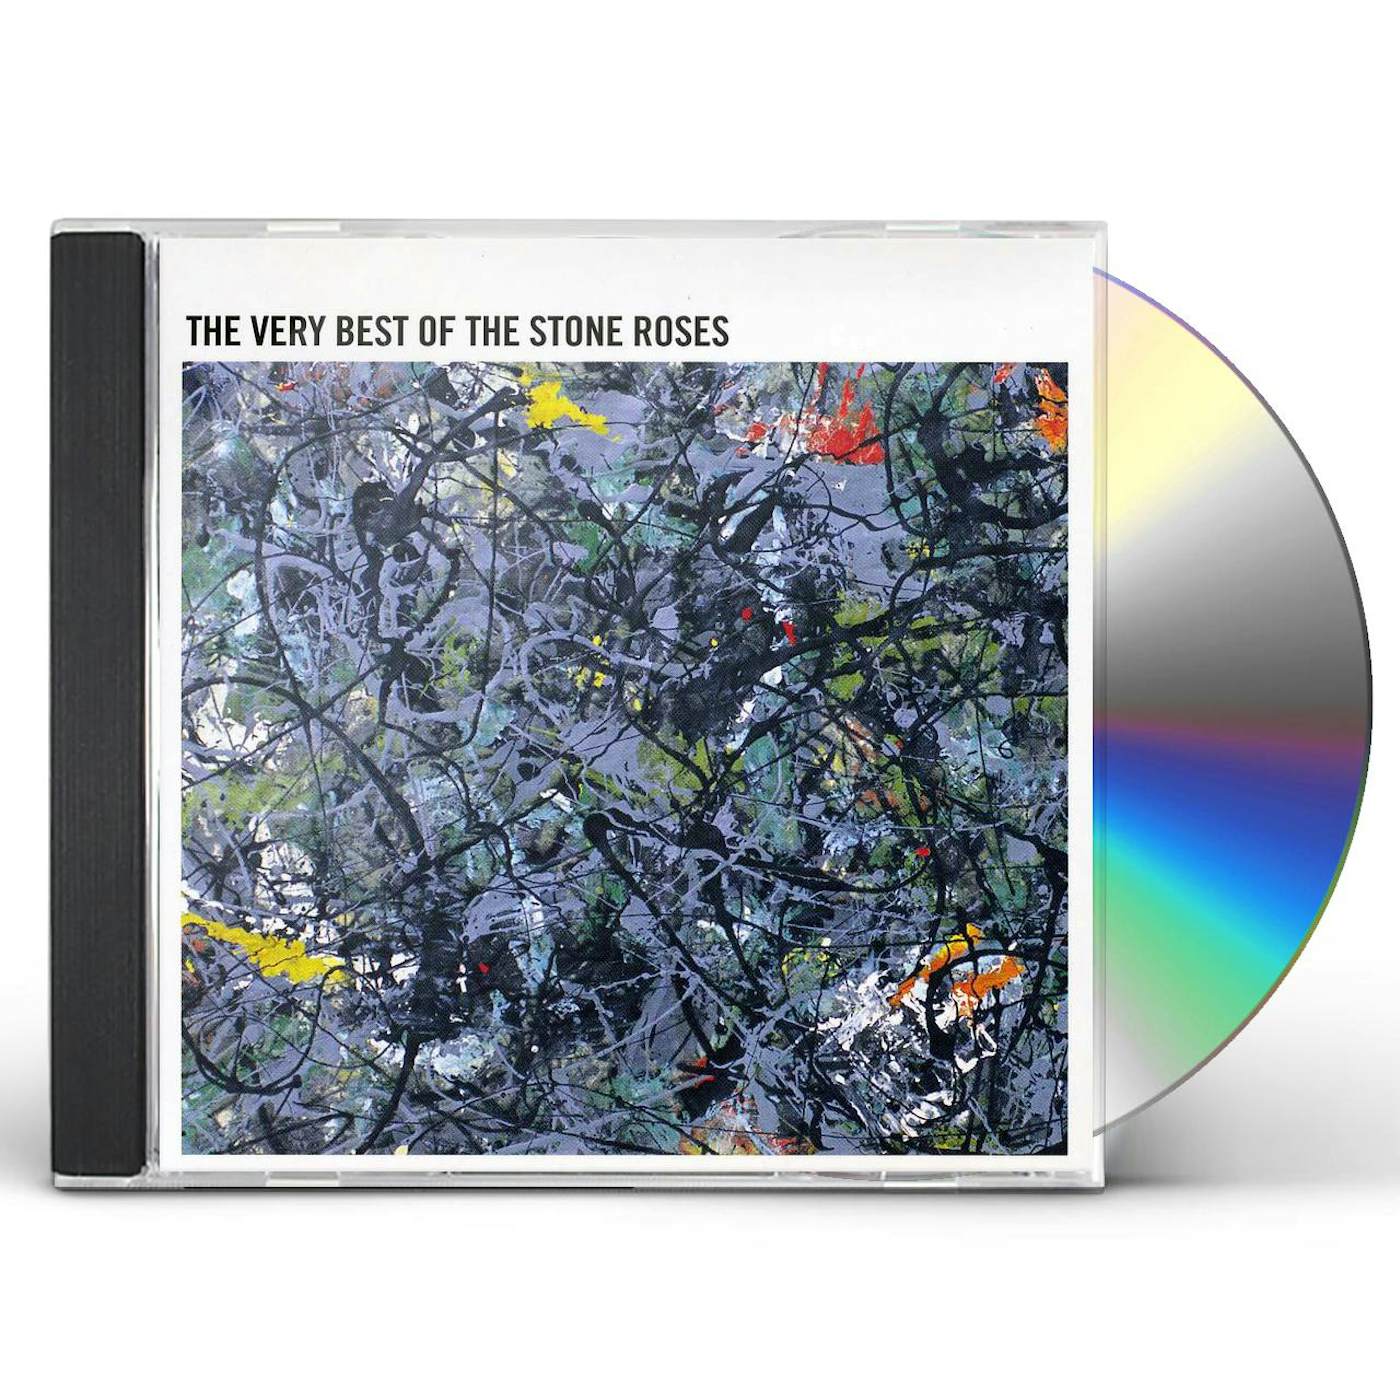 The Stone Roses VERY BEST OF CD